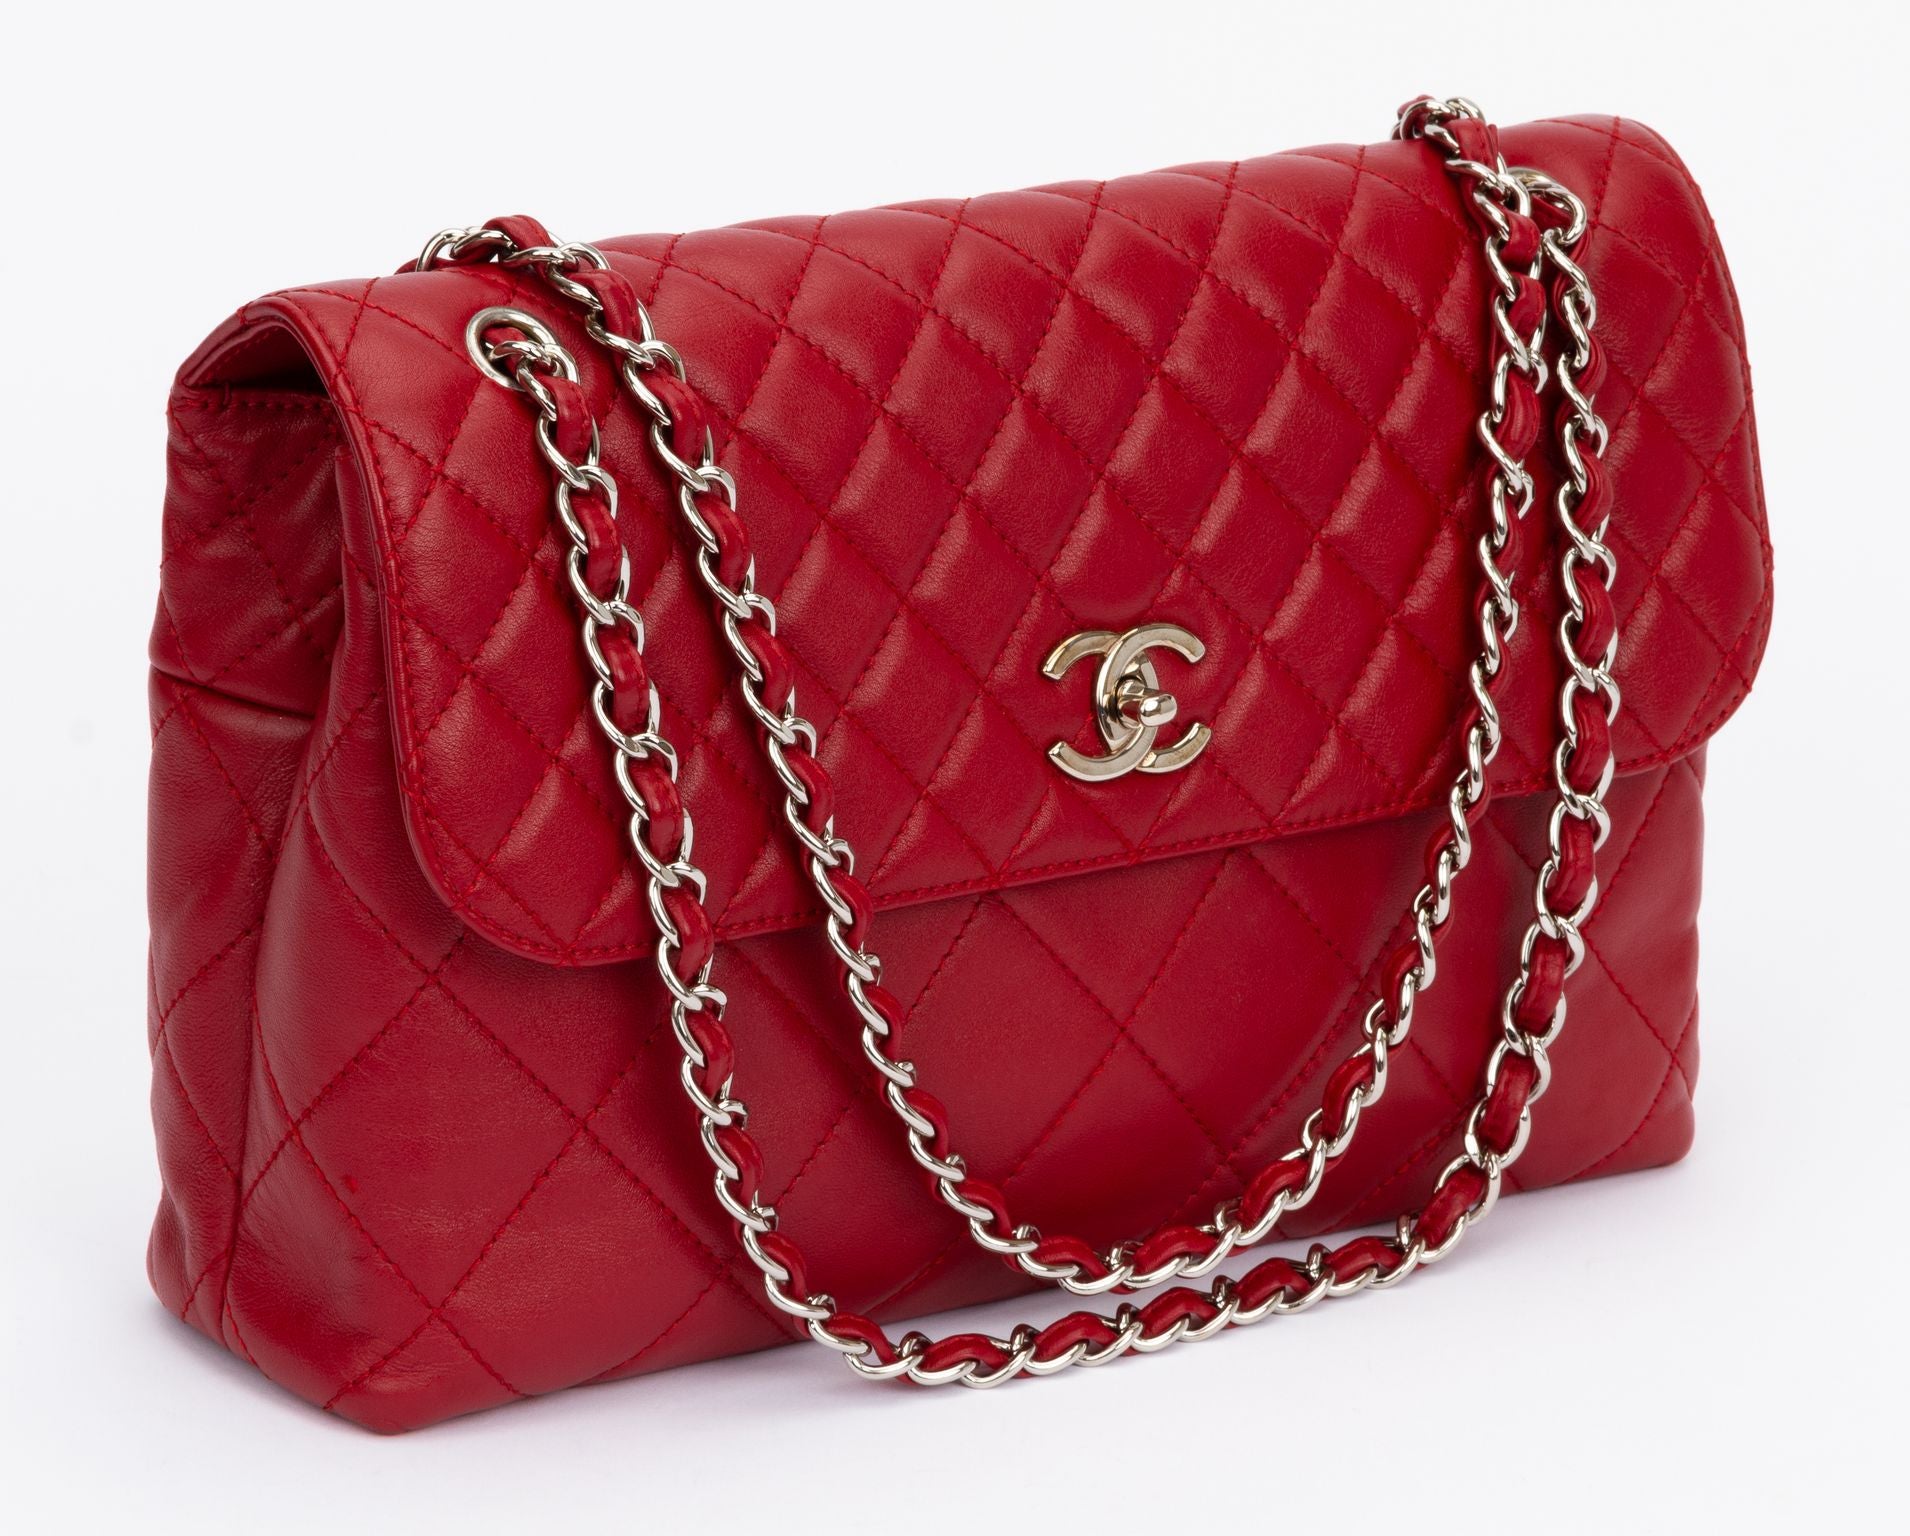 chanel red bag classic